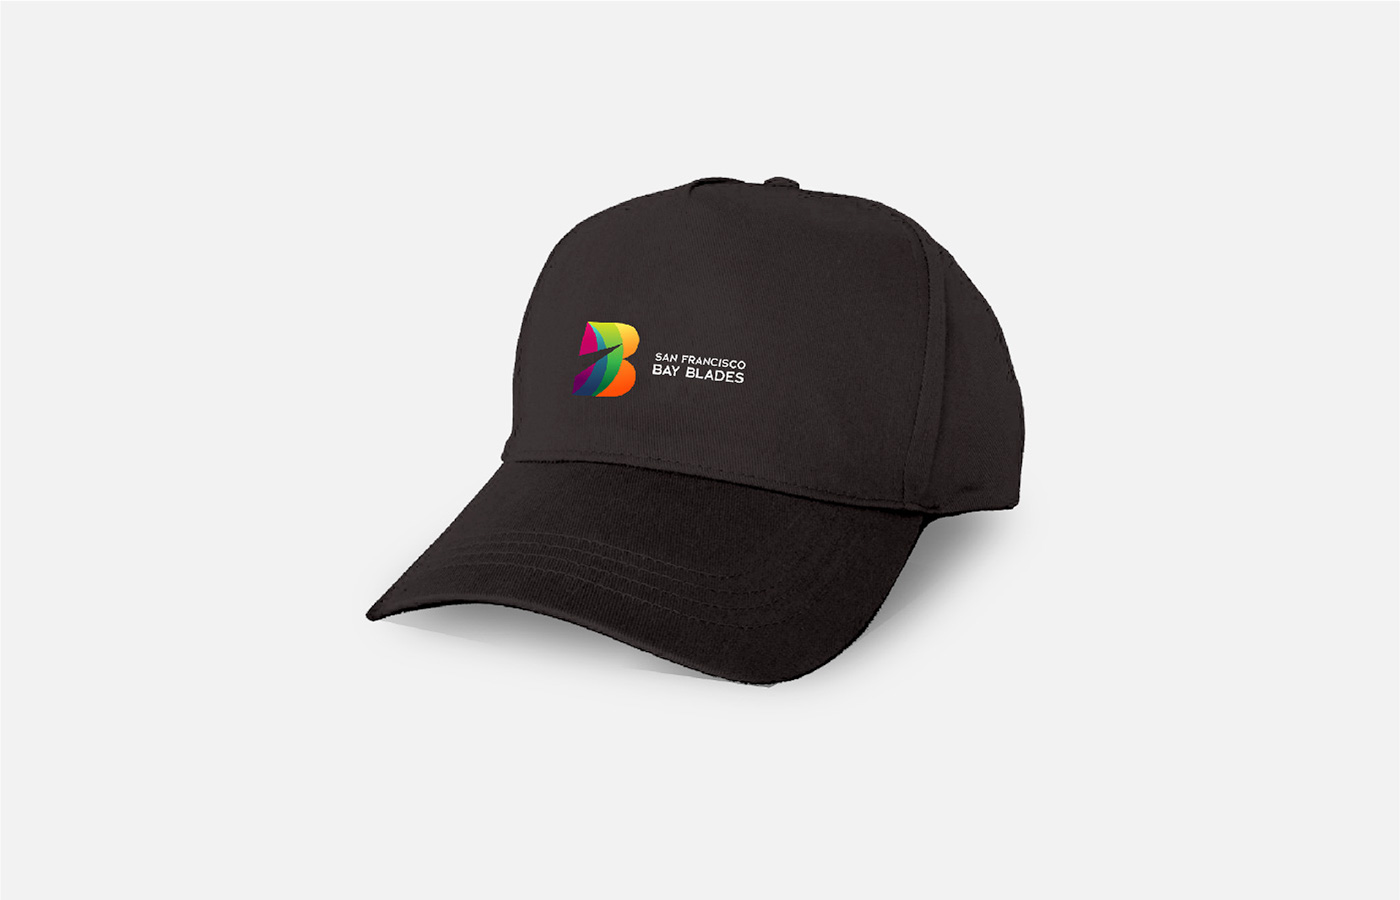 rebranding brand identity sports logo color gradient rowing atlethes colorful rainbow LGBT gay lesbian